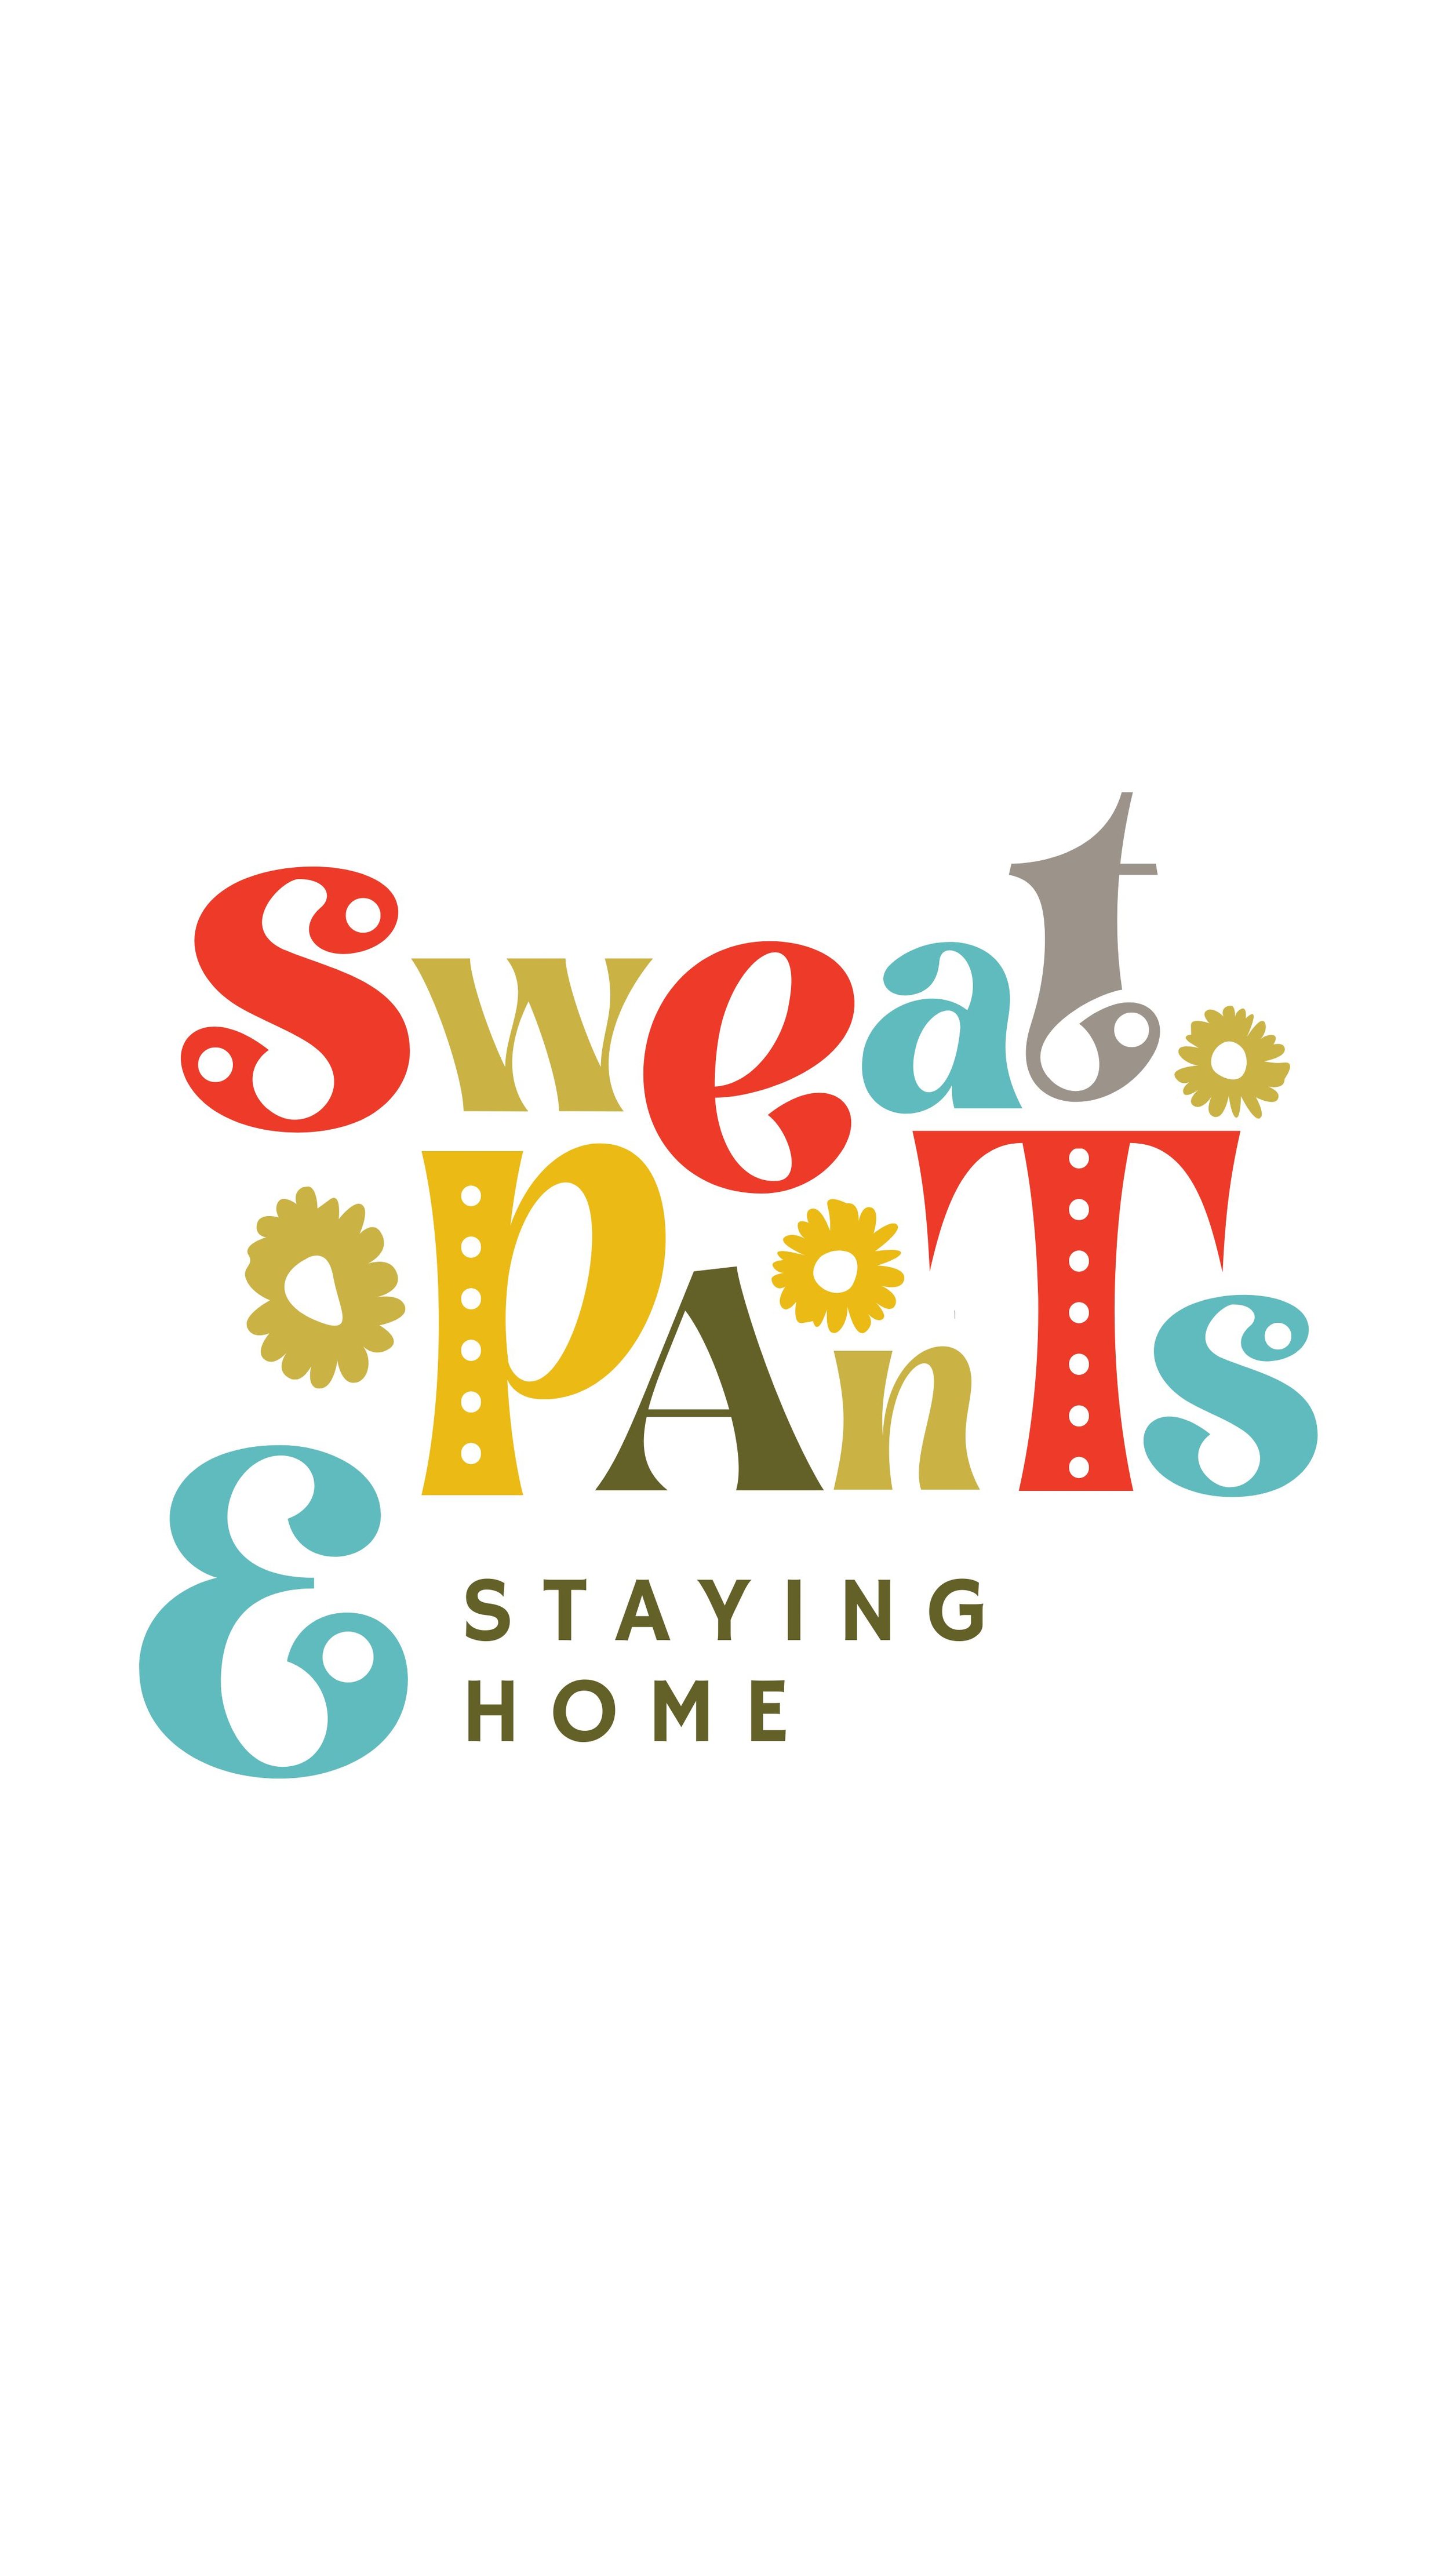 CAIGS1854-Sweatpants & Staying Home.jpg